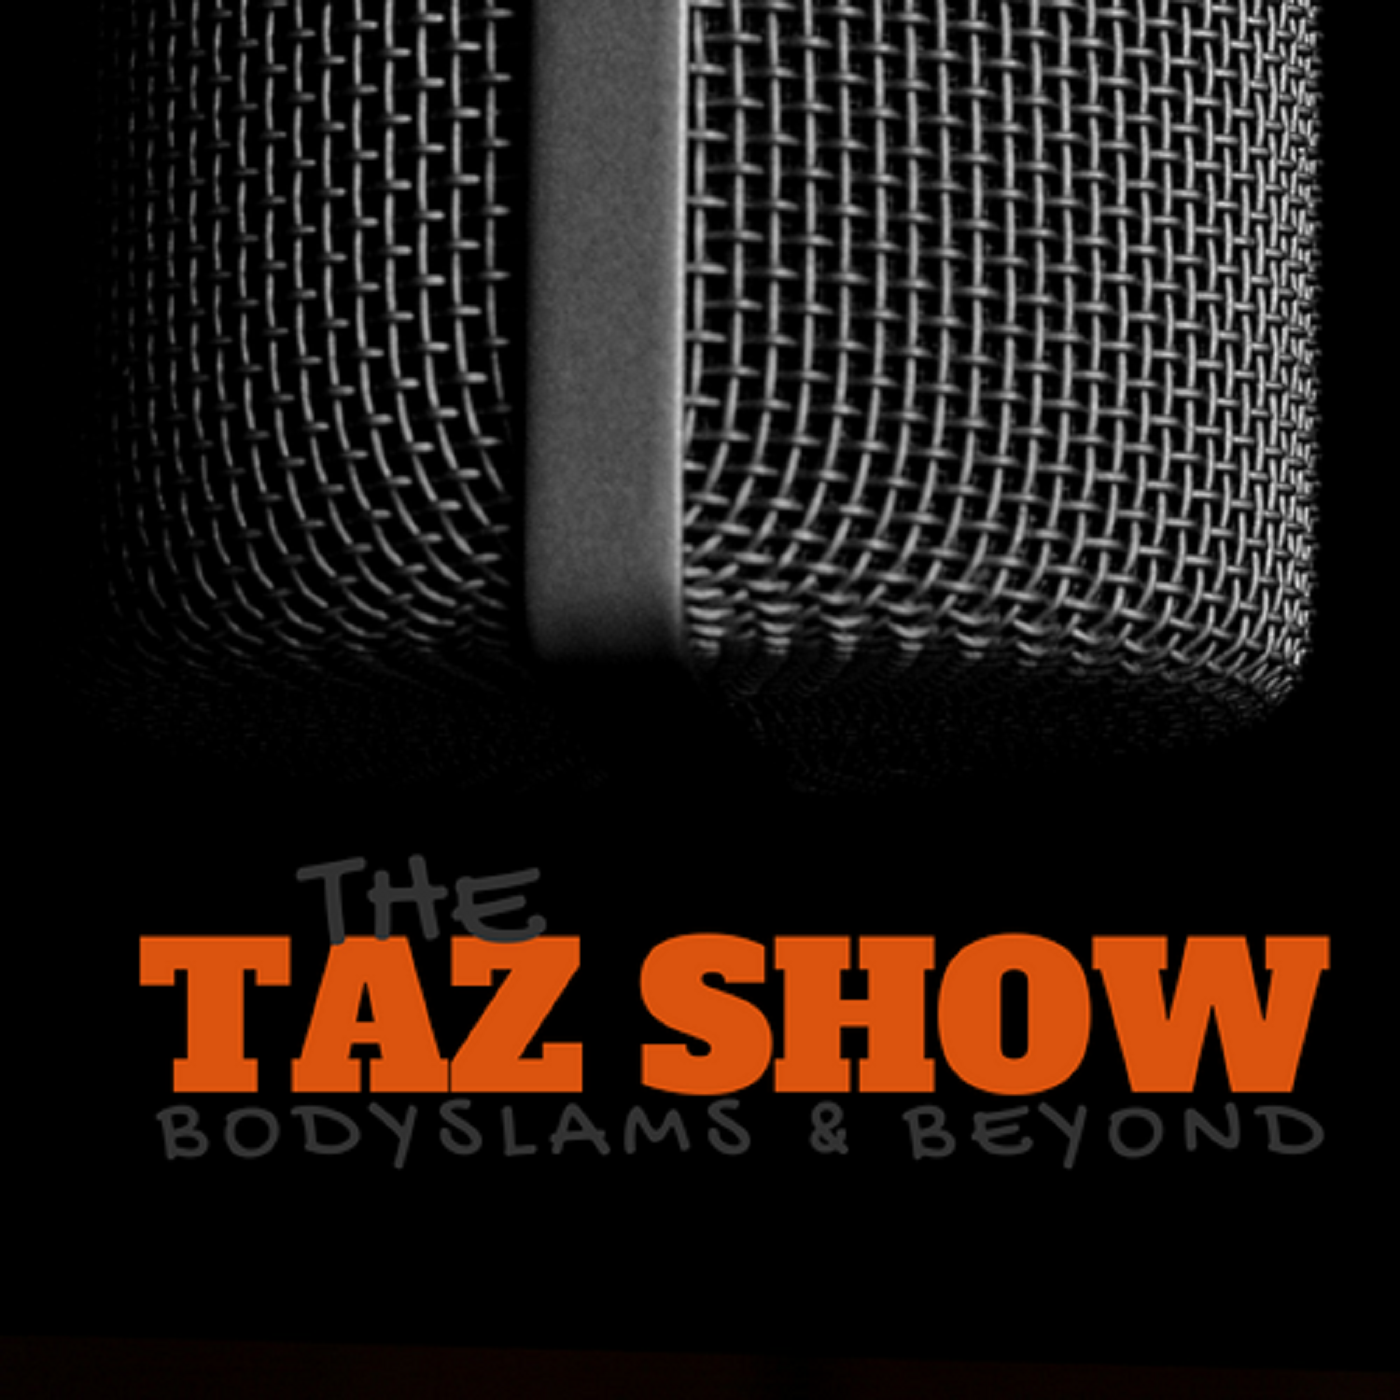 The Taz Show! Friday, October 9th, 2015